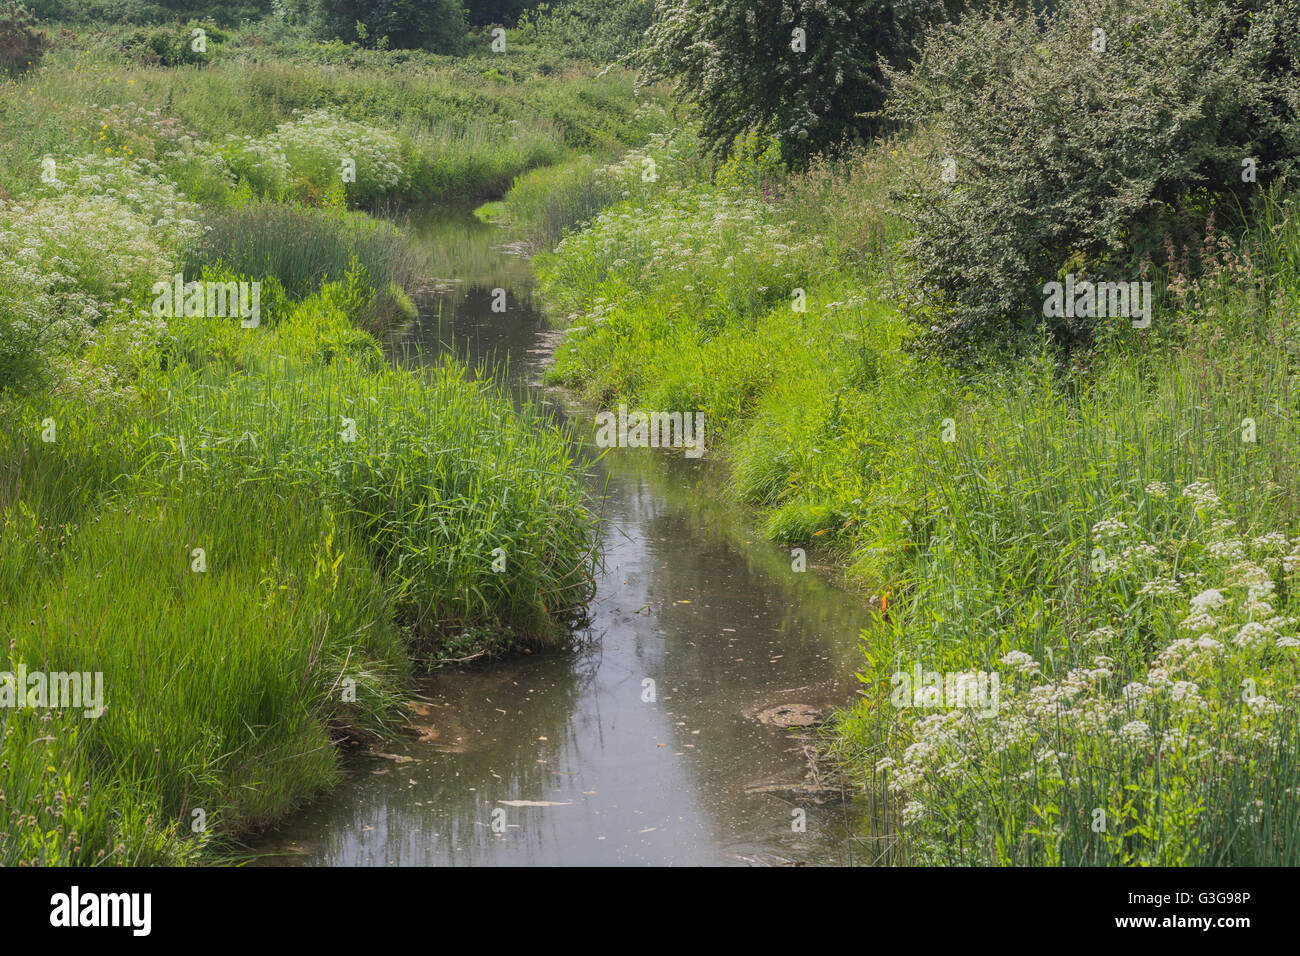 Drainage ditch with static water, showing clumps of poisonous water dropwort / Oenanthe crocata by water's edge. One of UK's most poisonous plants. Stock Photo